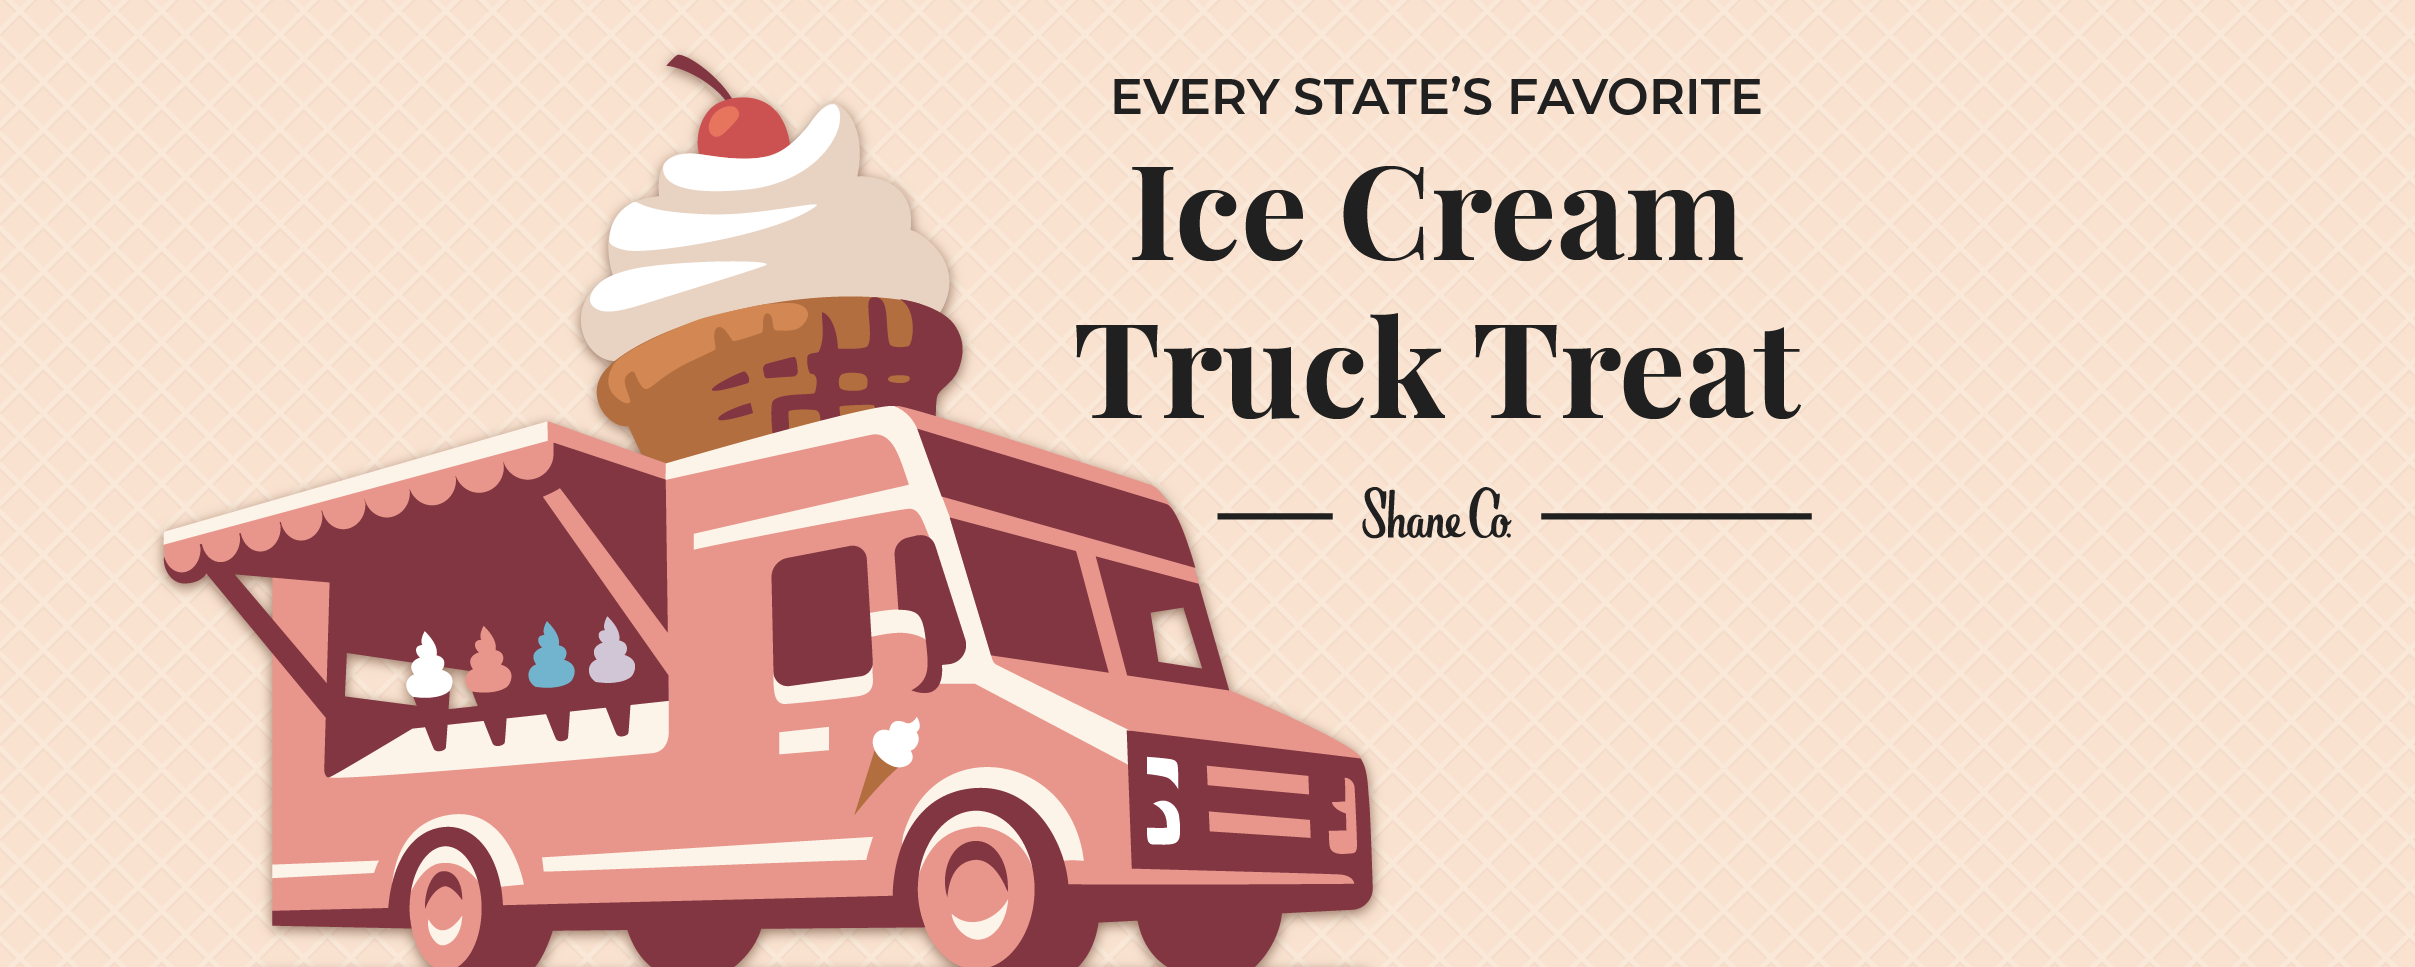 A header image for a blog about popular ice cream truck treats